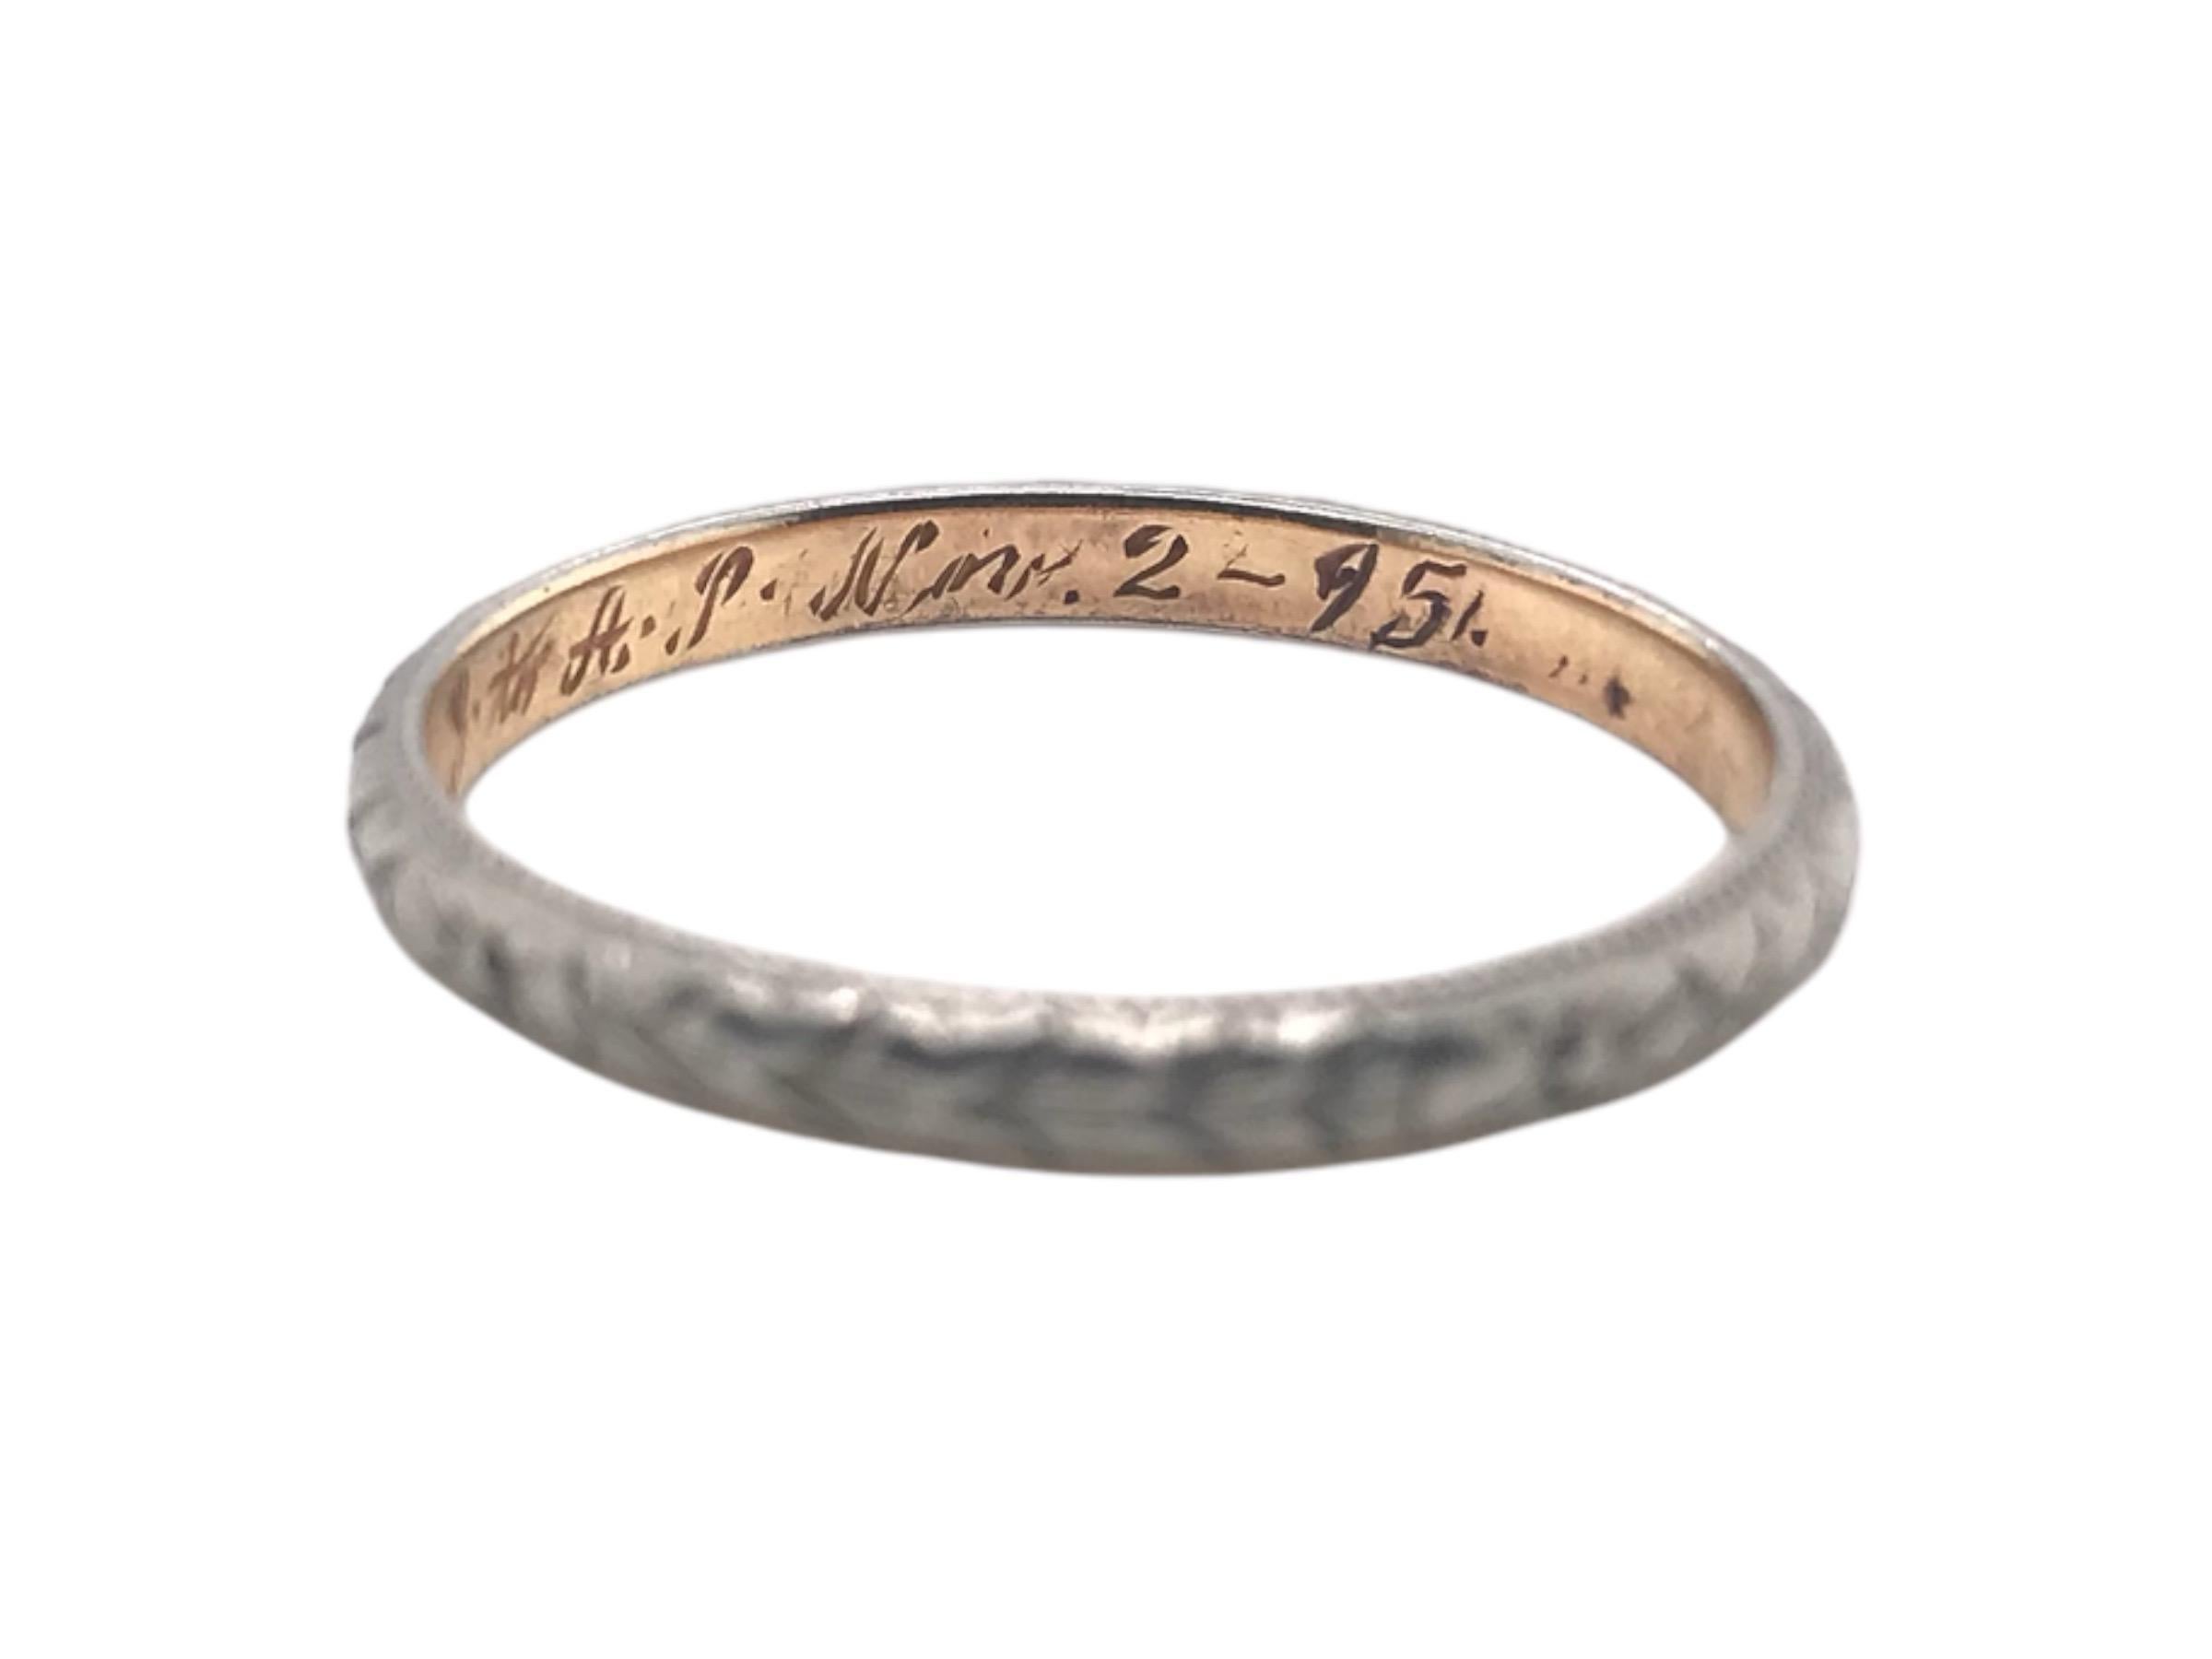 Vintage Engraved Wedding Band Platinum & 18K Yellow Gold Size 8 In Good Condition For Sale In Montgomery, AL